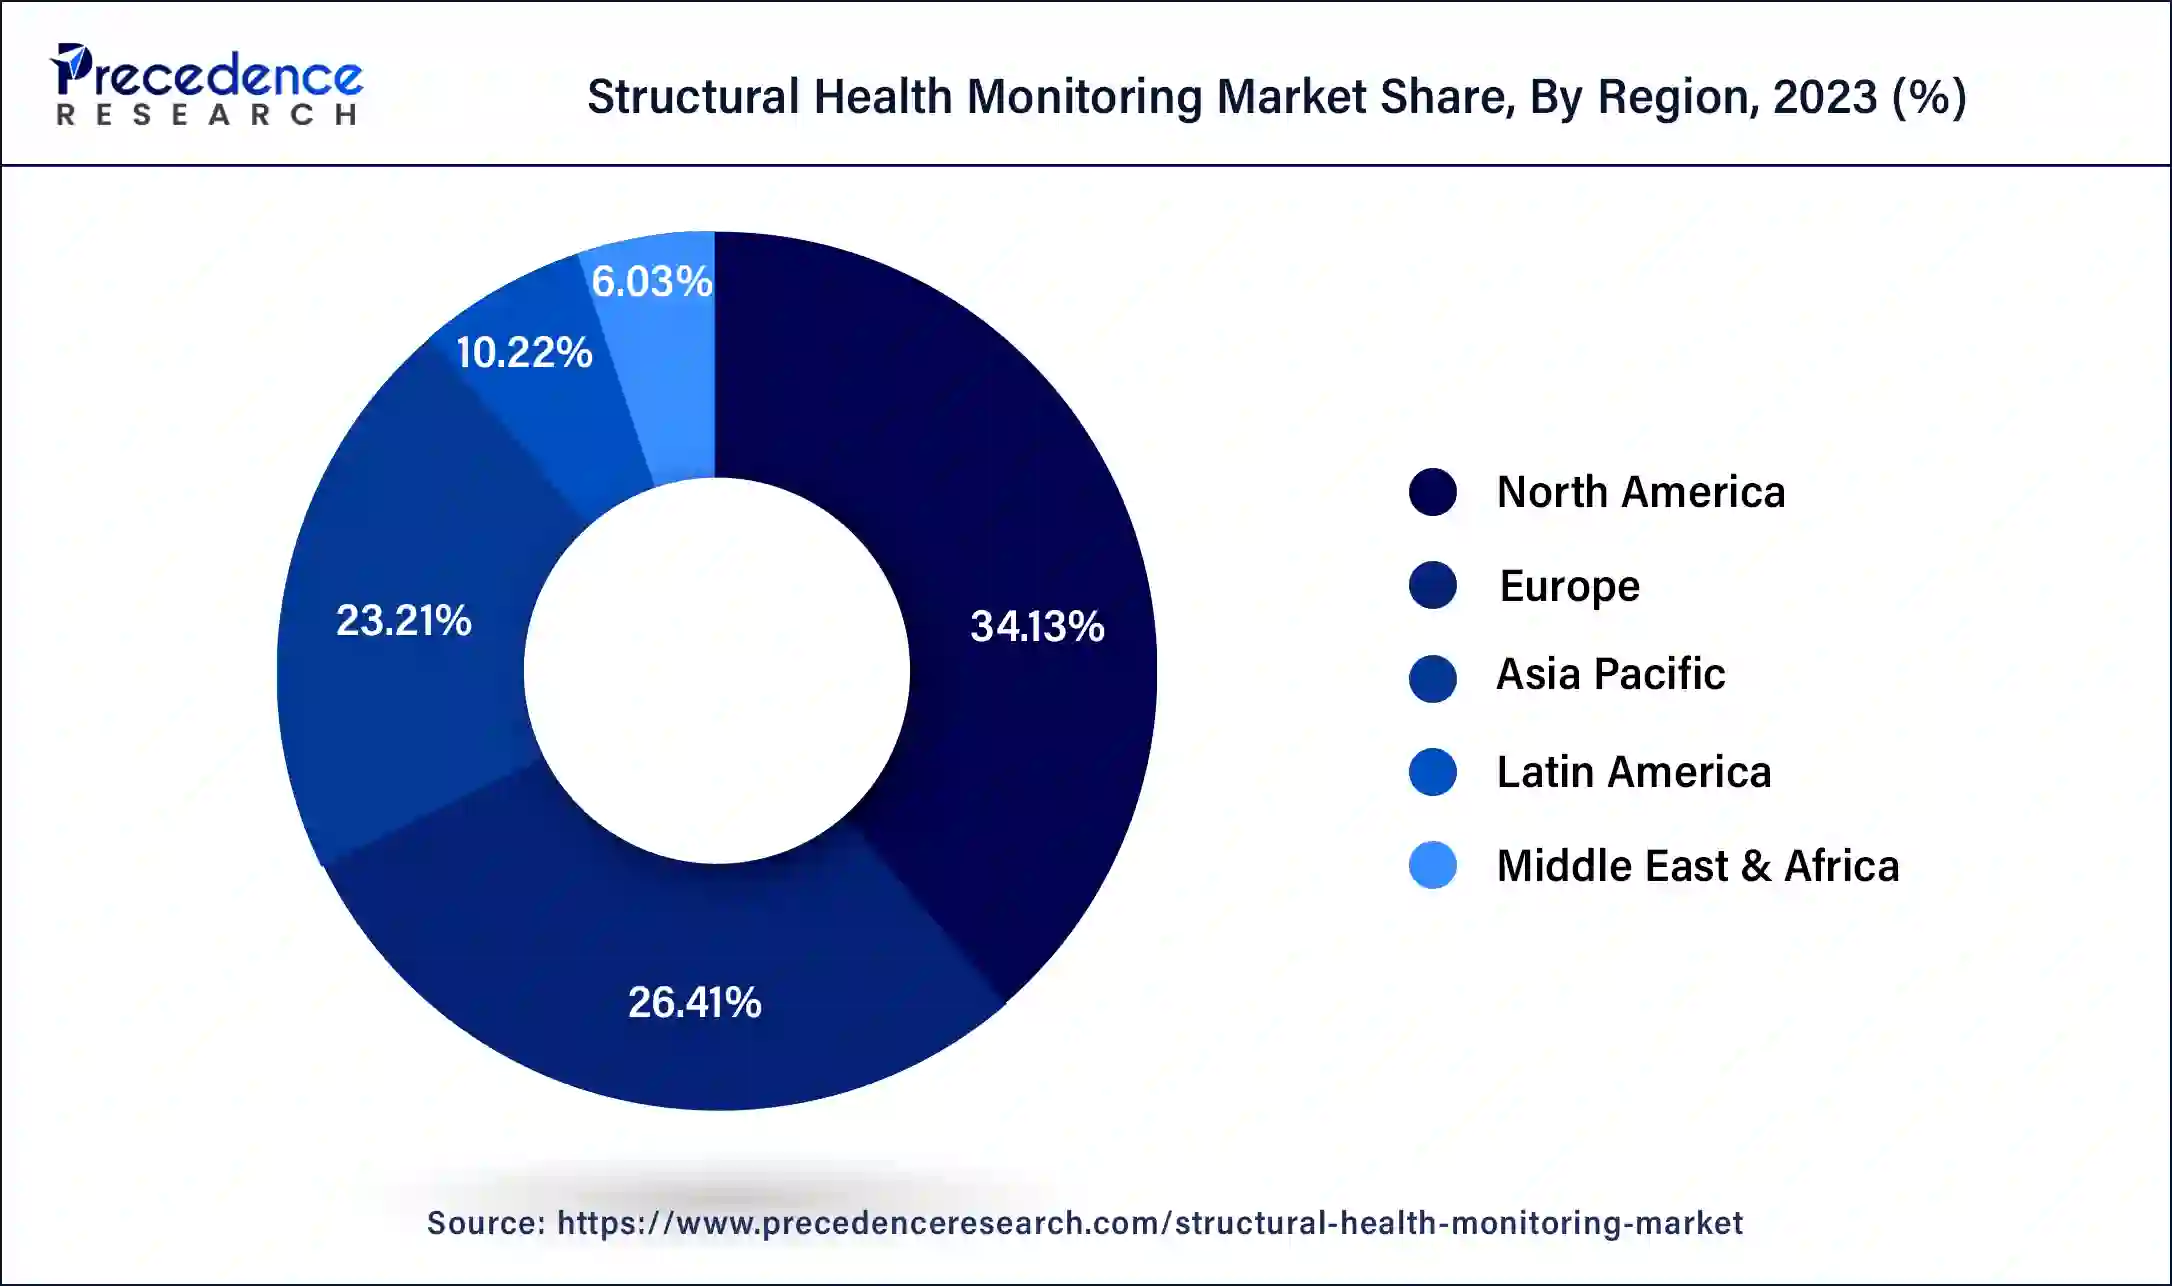 Structural Health Monitoring Market Share, By Region, 2023 (%)